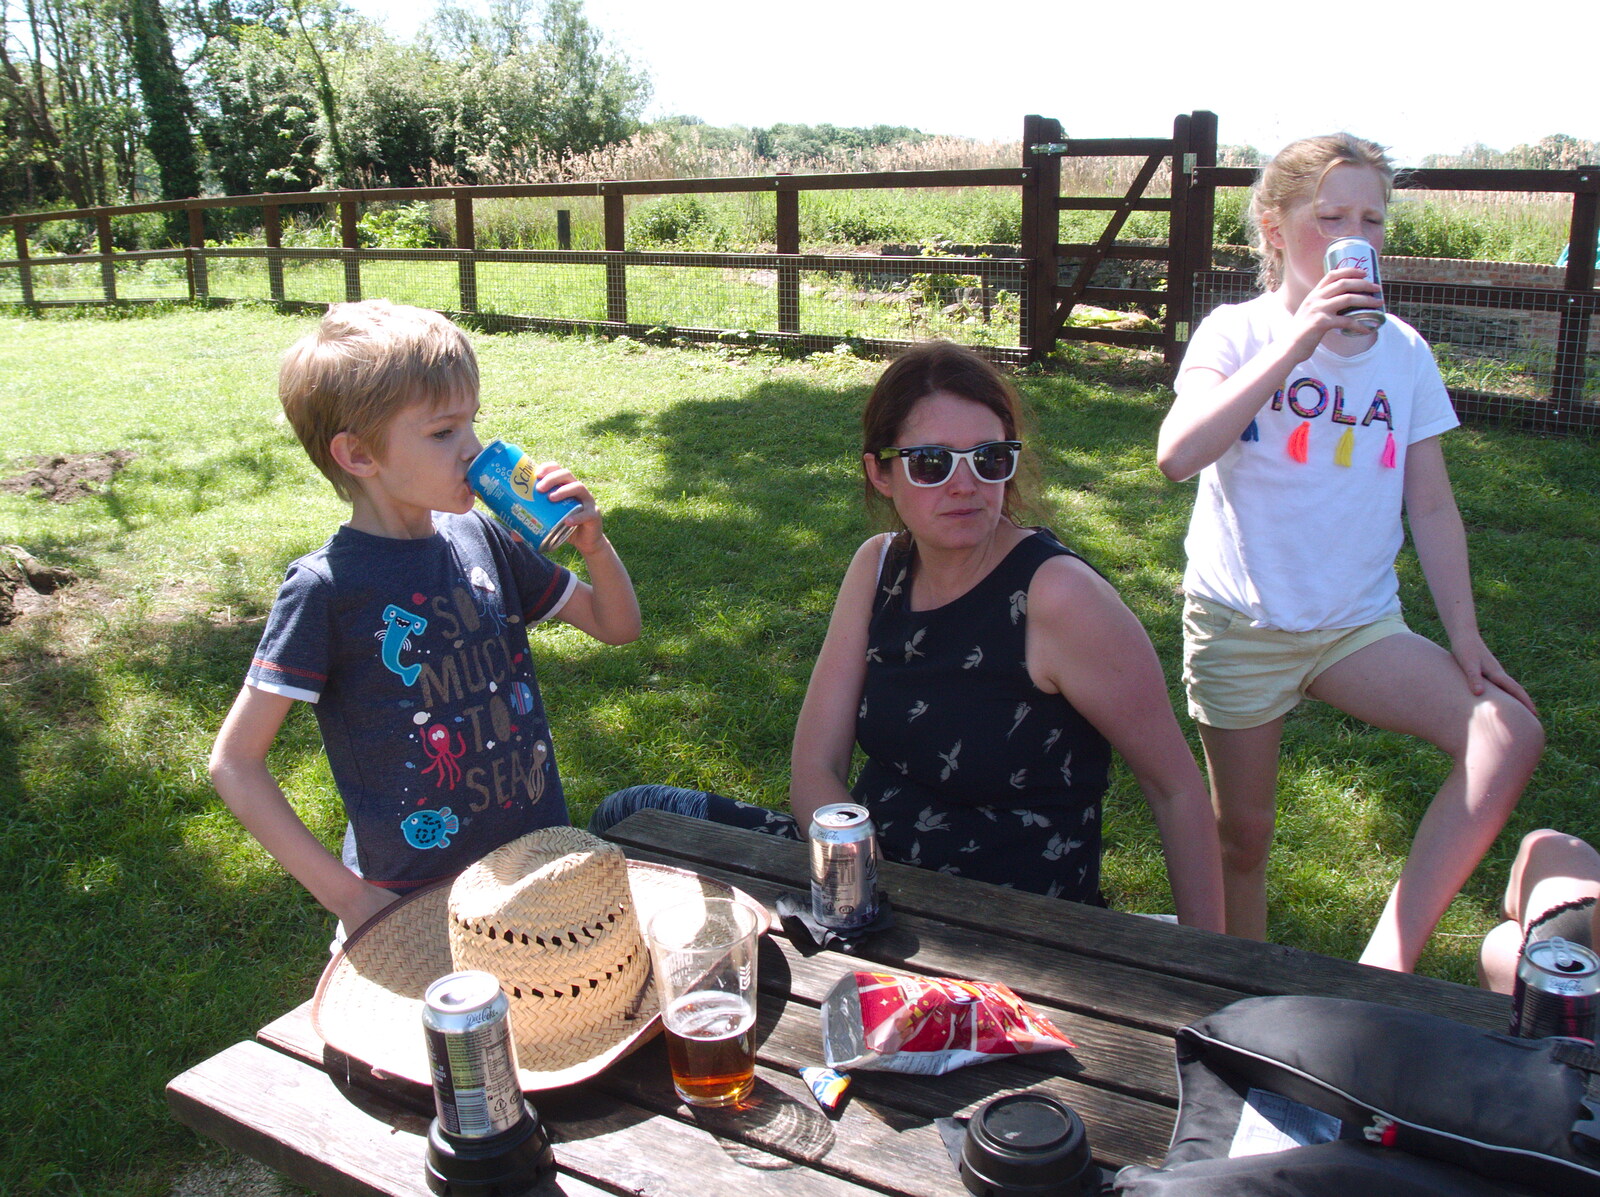 Time for a drink in the beer garden from Camping at Three Rivers, Geldeston, Norfolk - 1st June 2019